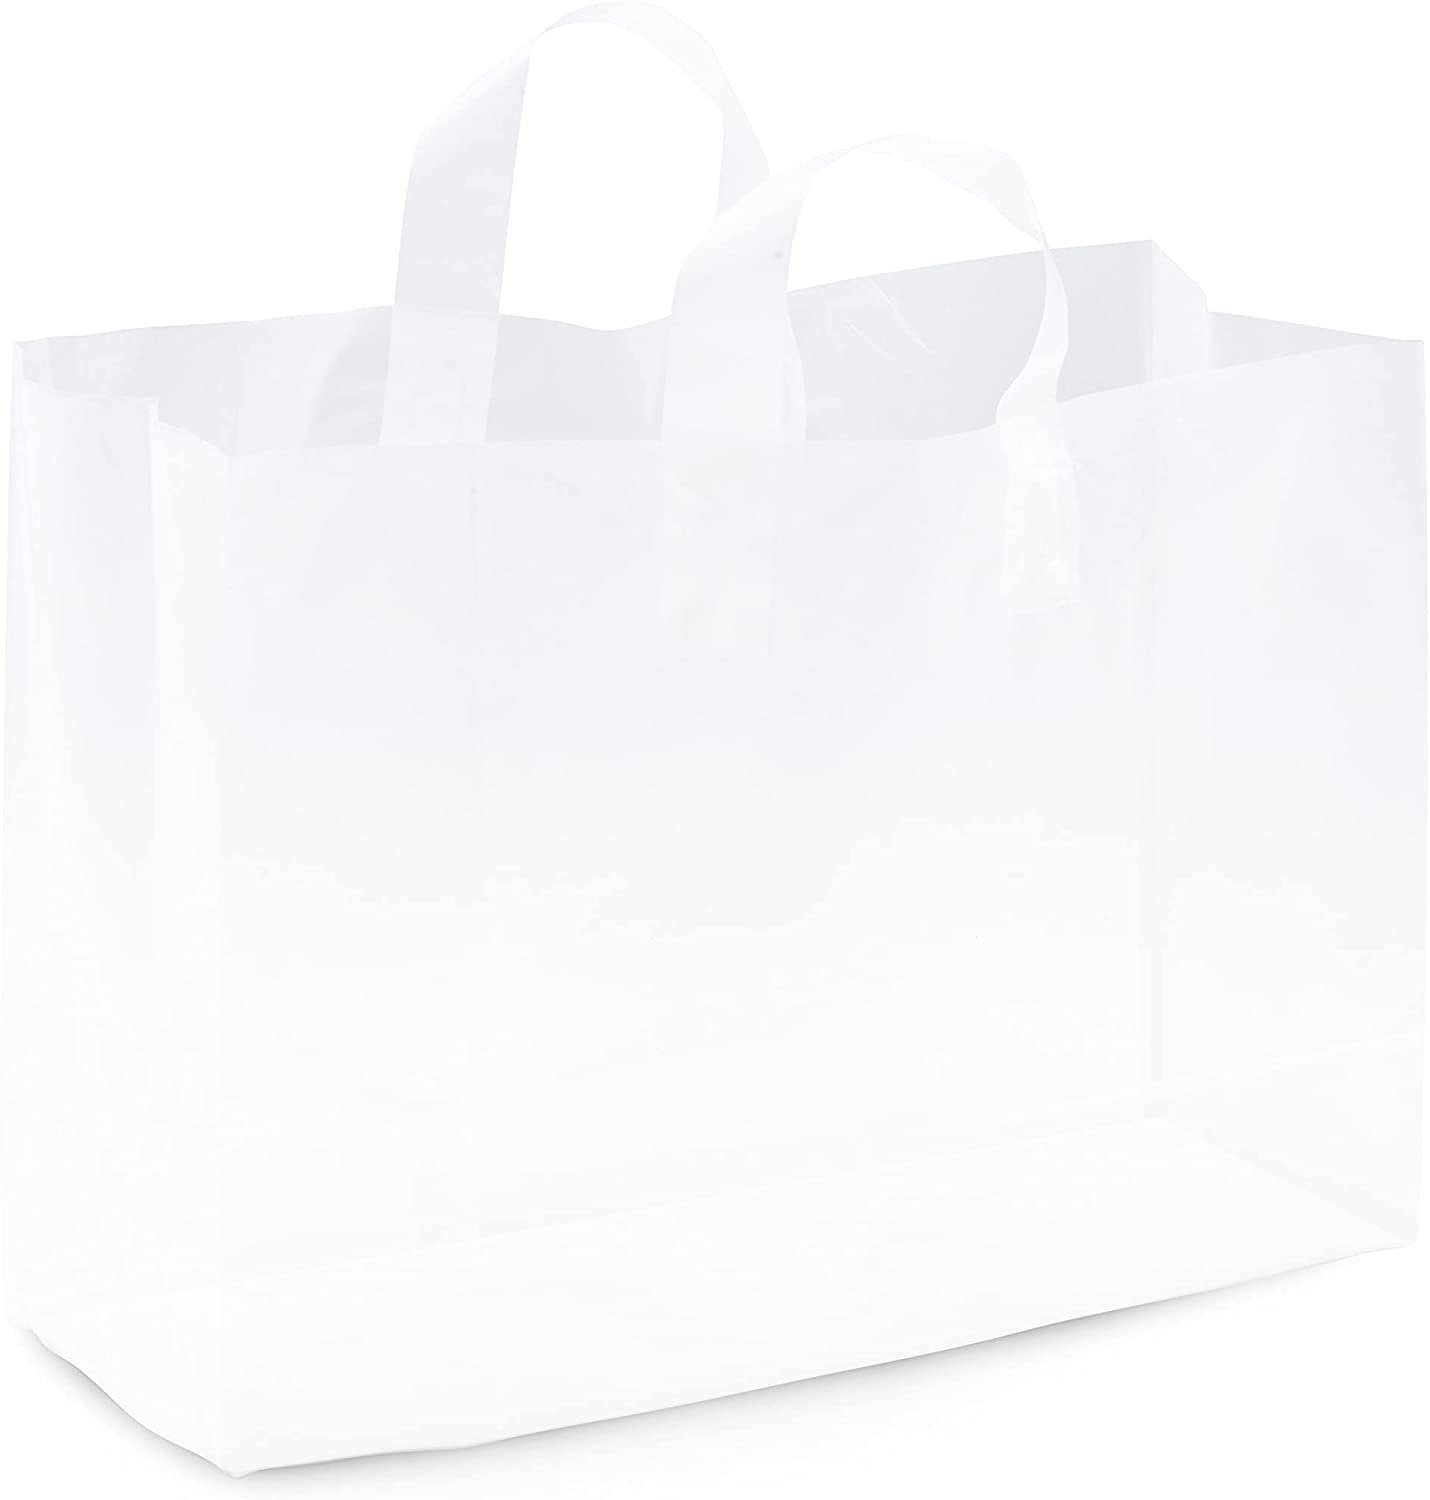 Frosted Plastic Gift Bags 50 Pack 12x16x5 Clear Frosted Plastic Bags for Small Business with Soft Loop Handles for Gifts Retail Bags and More